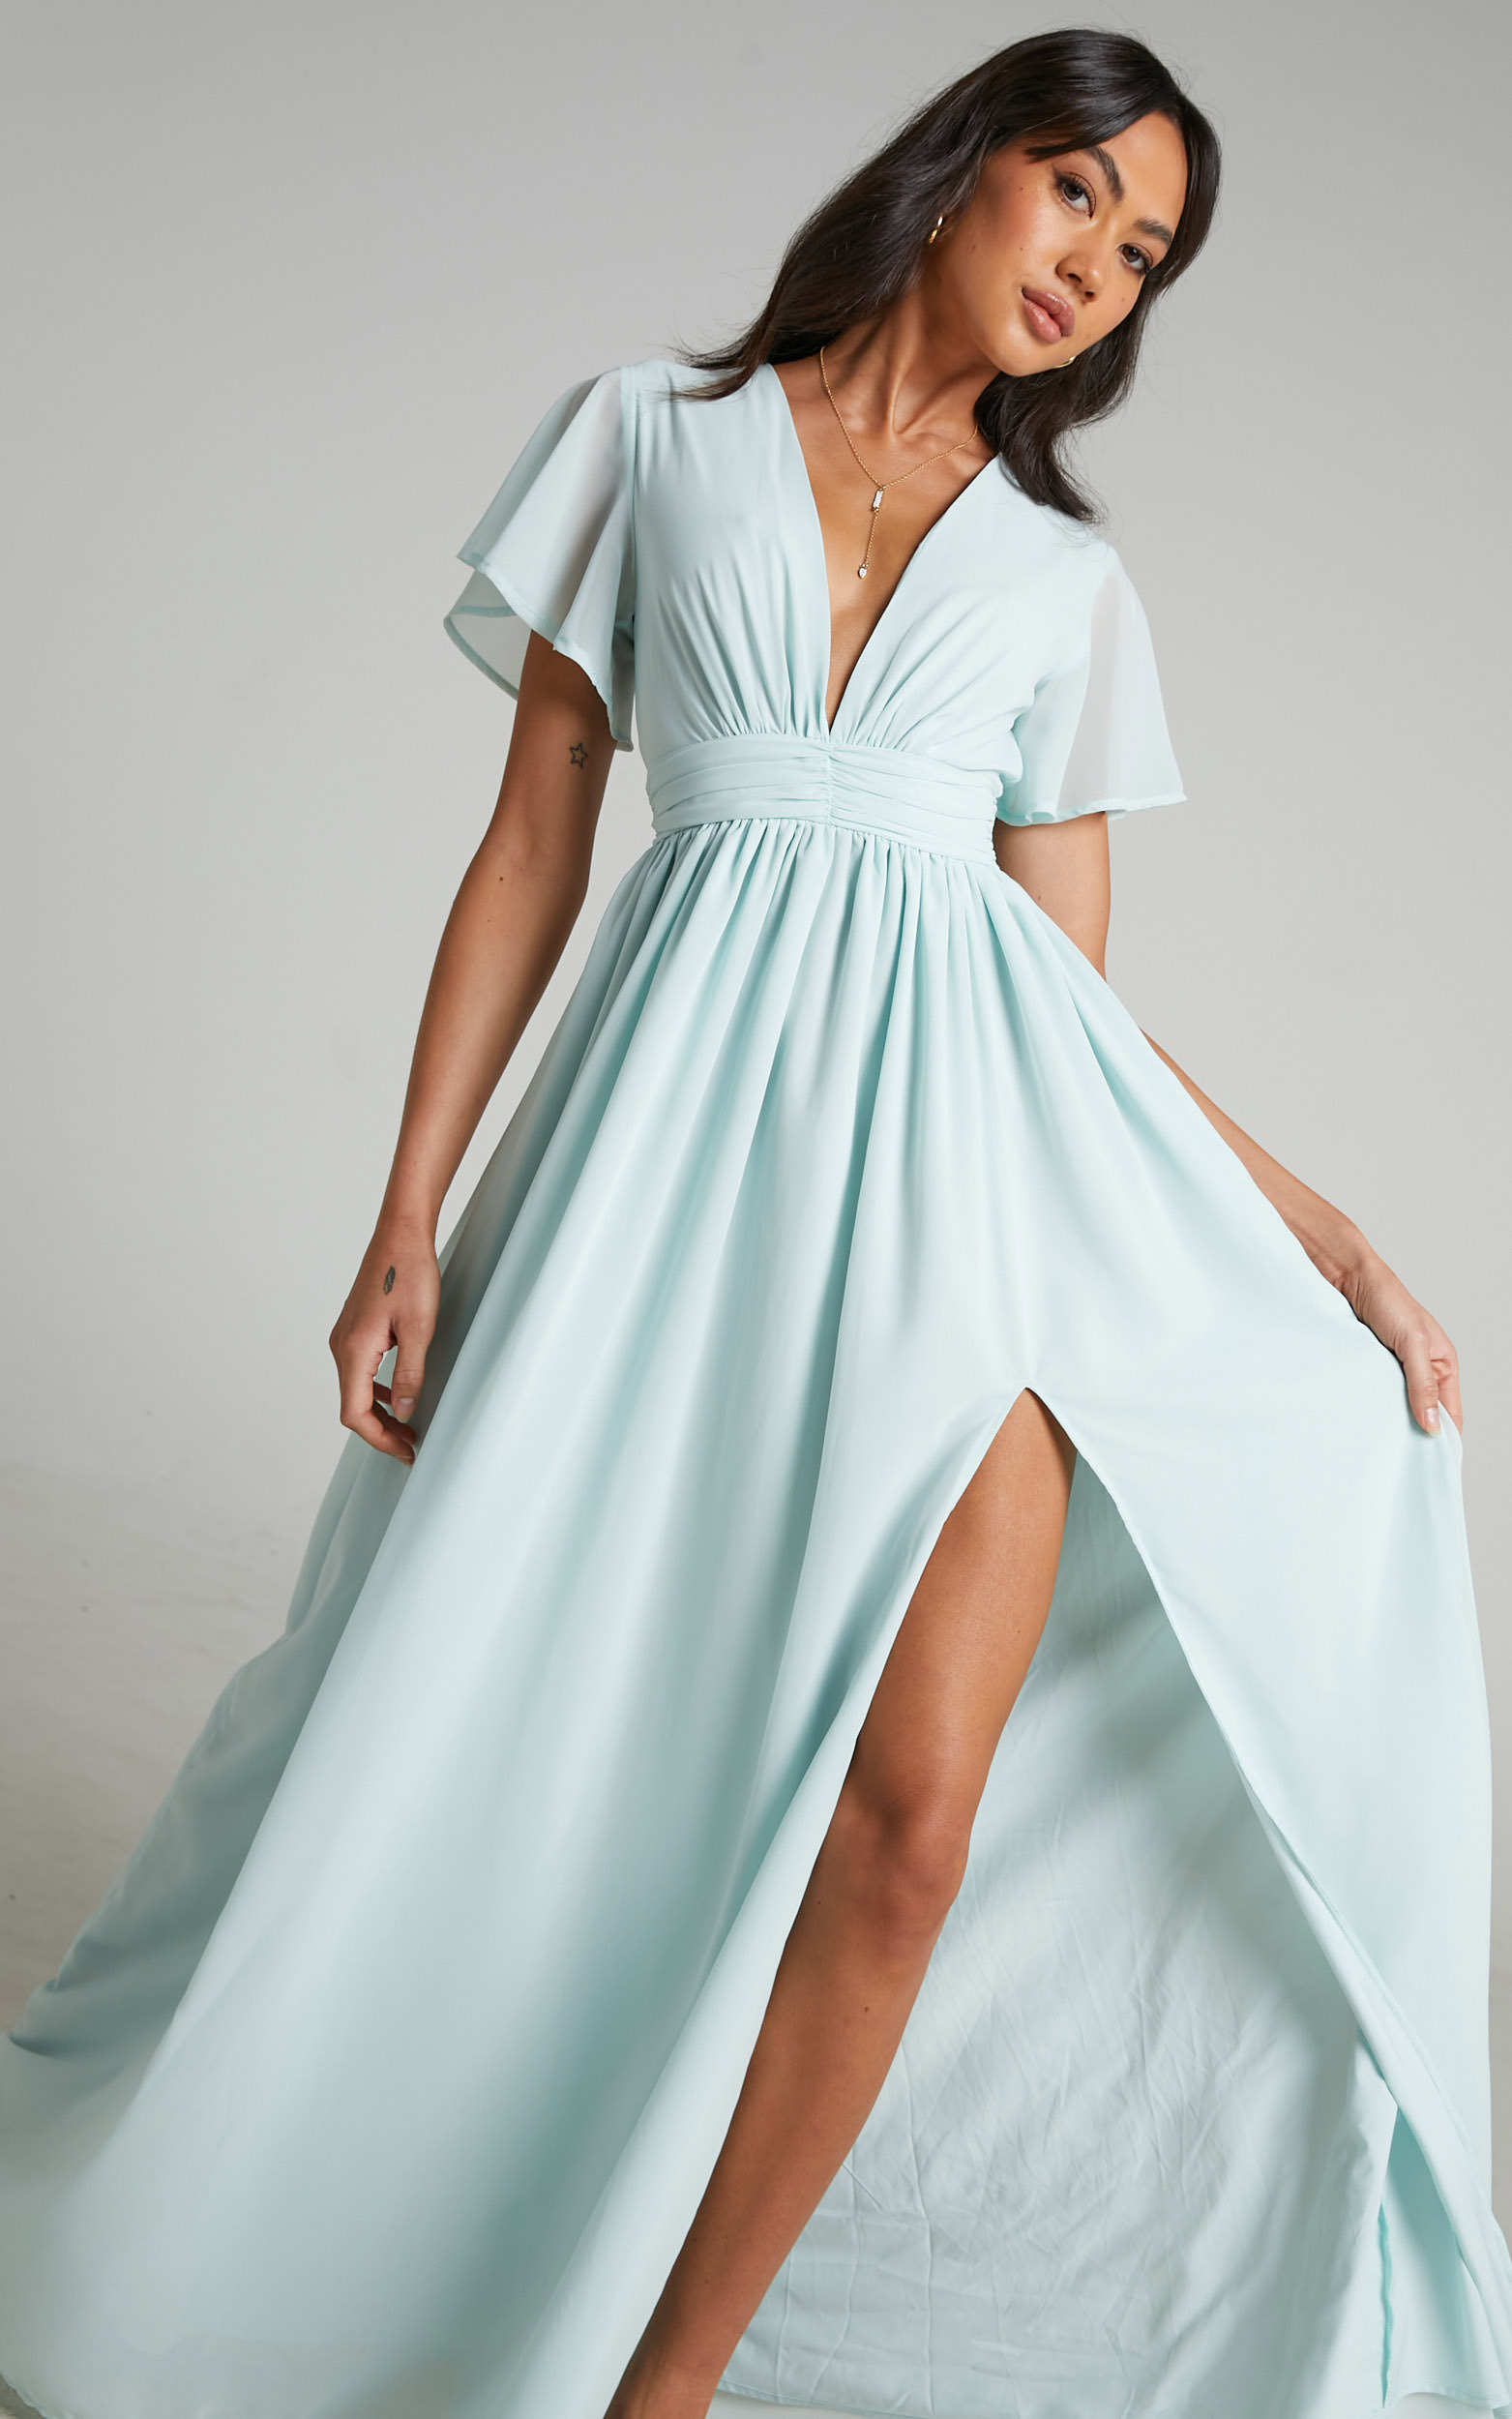 December Empire Waist Maxi Dress in Ice Blue - 06, GRN2, hi-res image number null